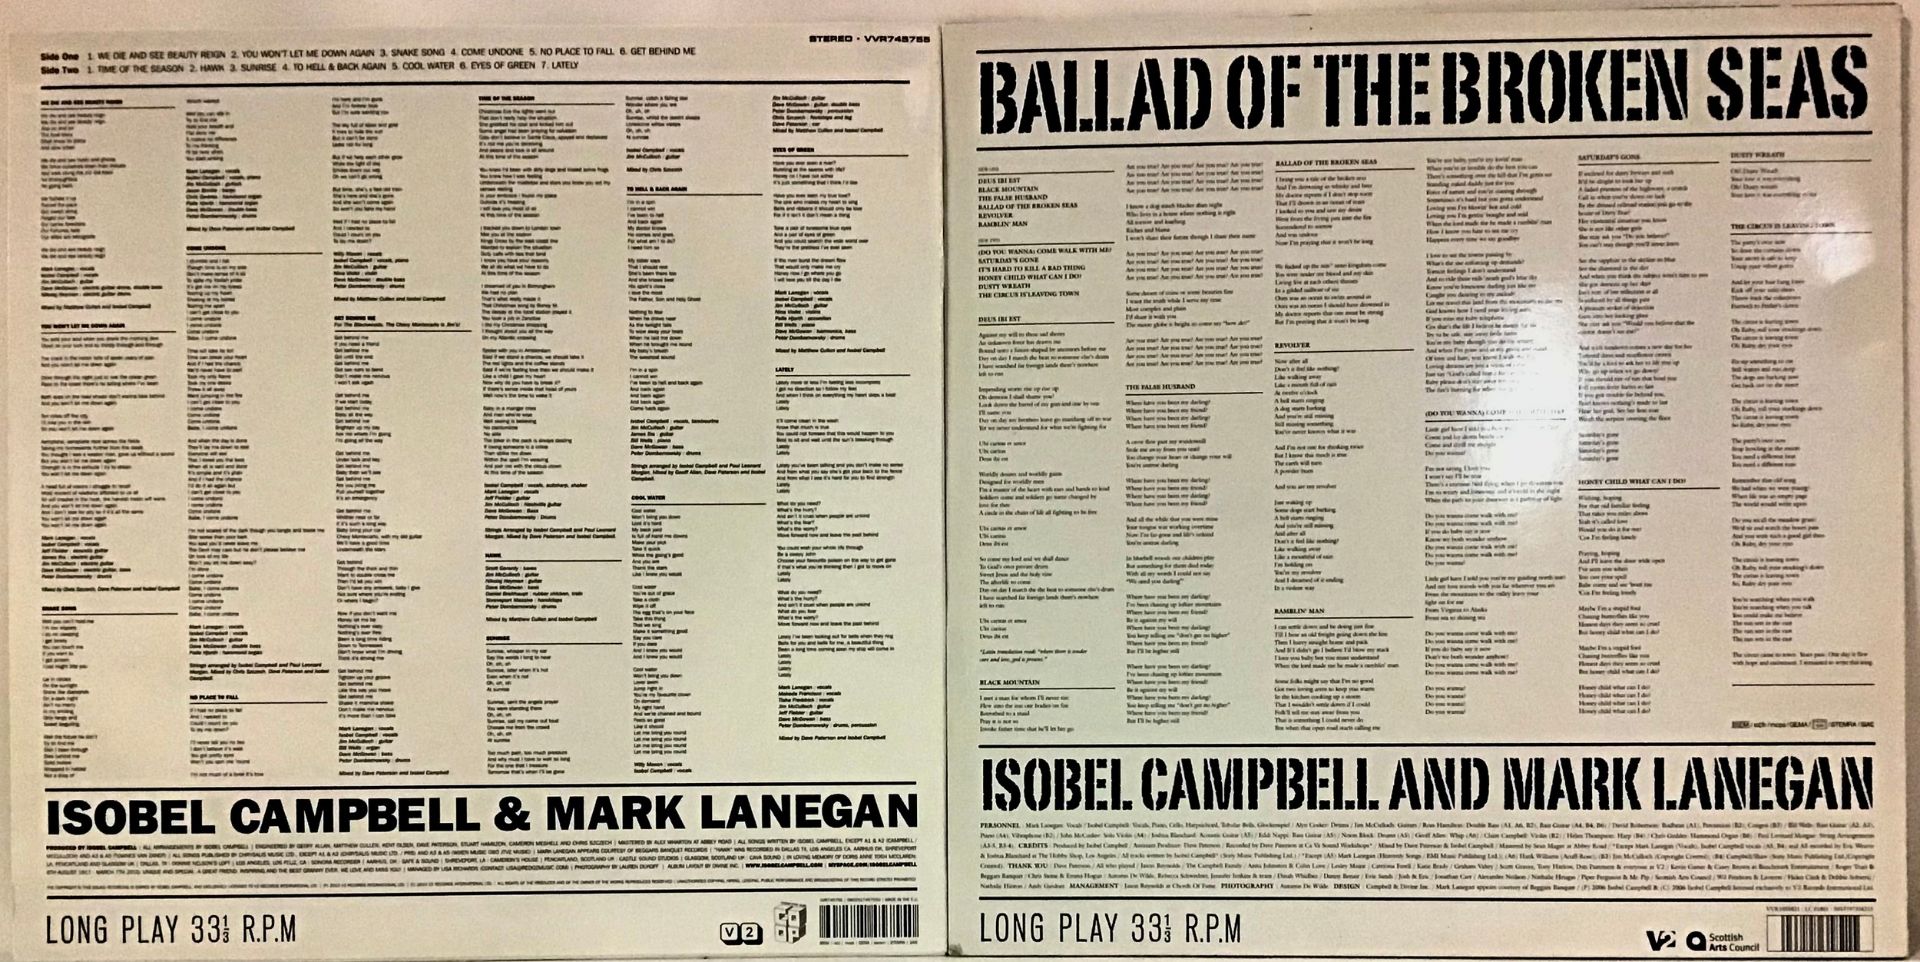 ISOBEL CAMPBELL AND MARK LANEGAN VINYL LP’S X 2. Found here both in Excellent condition with plain - Image 2 of 2